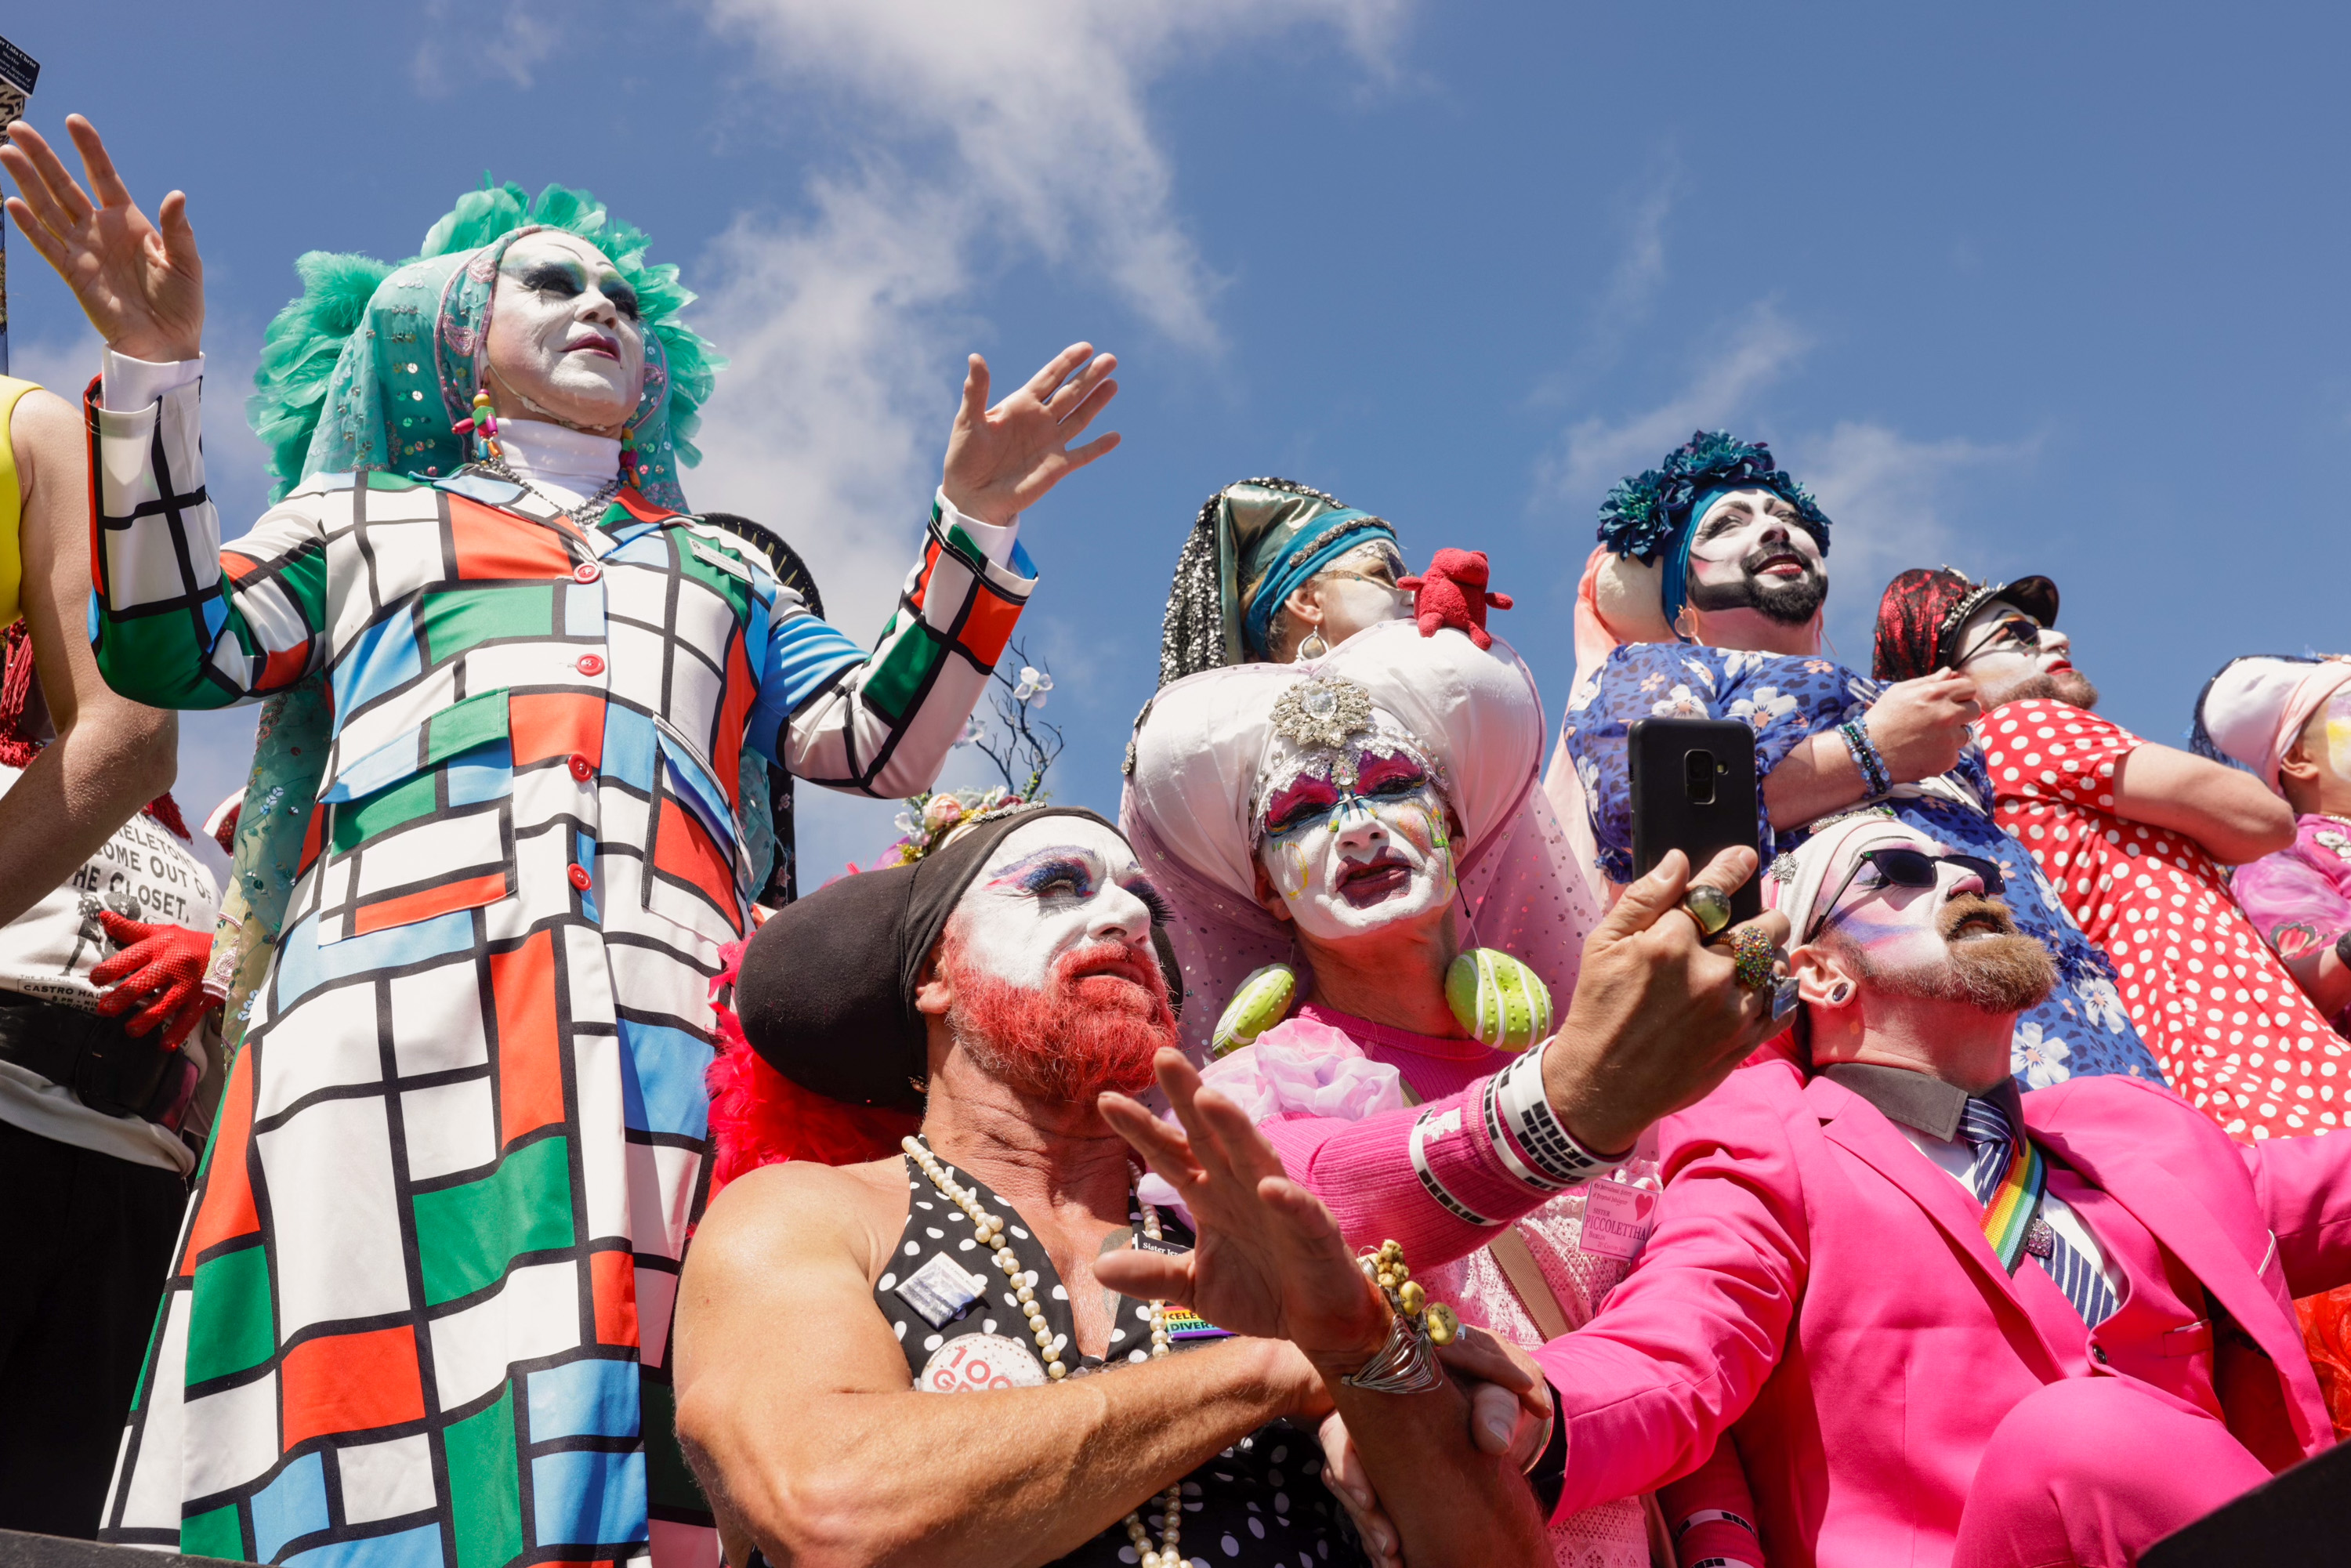 A group of people in colorful, exaggerated costumes and makeup, likely at a festive event, posing with theatrical expressions under a blue sky.